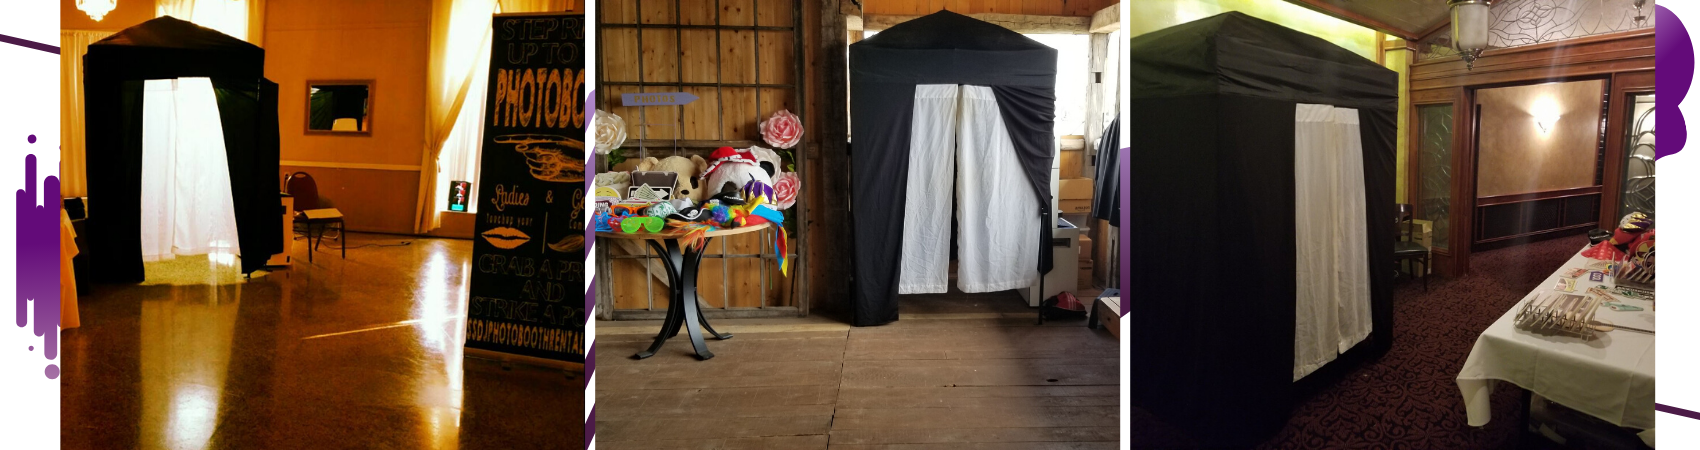 Photo Booth and Props for Party Photos